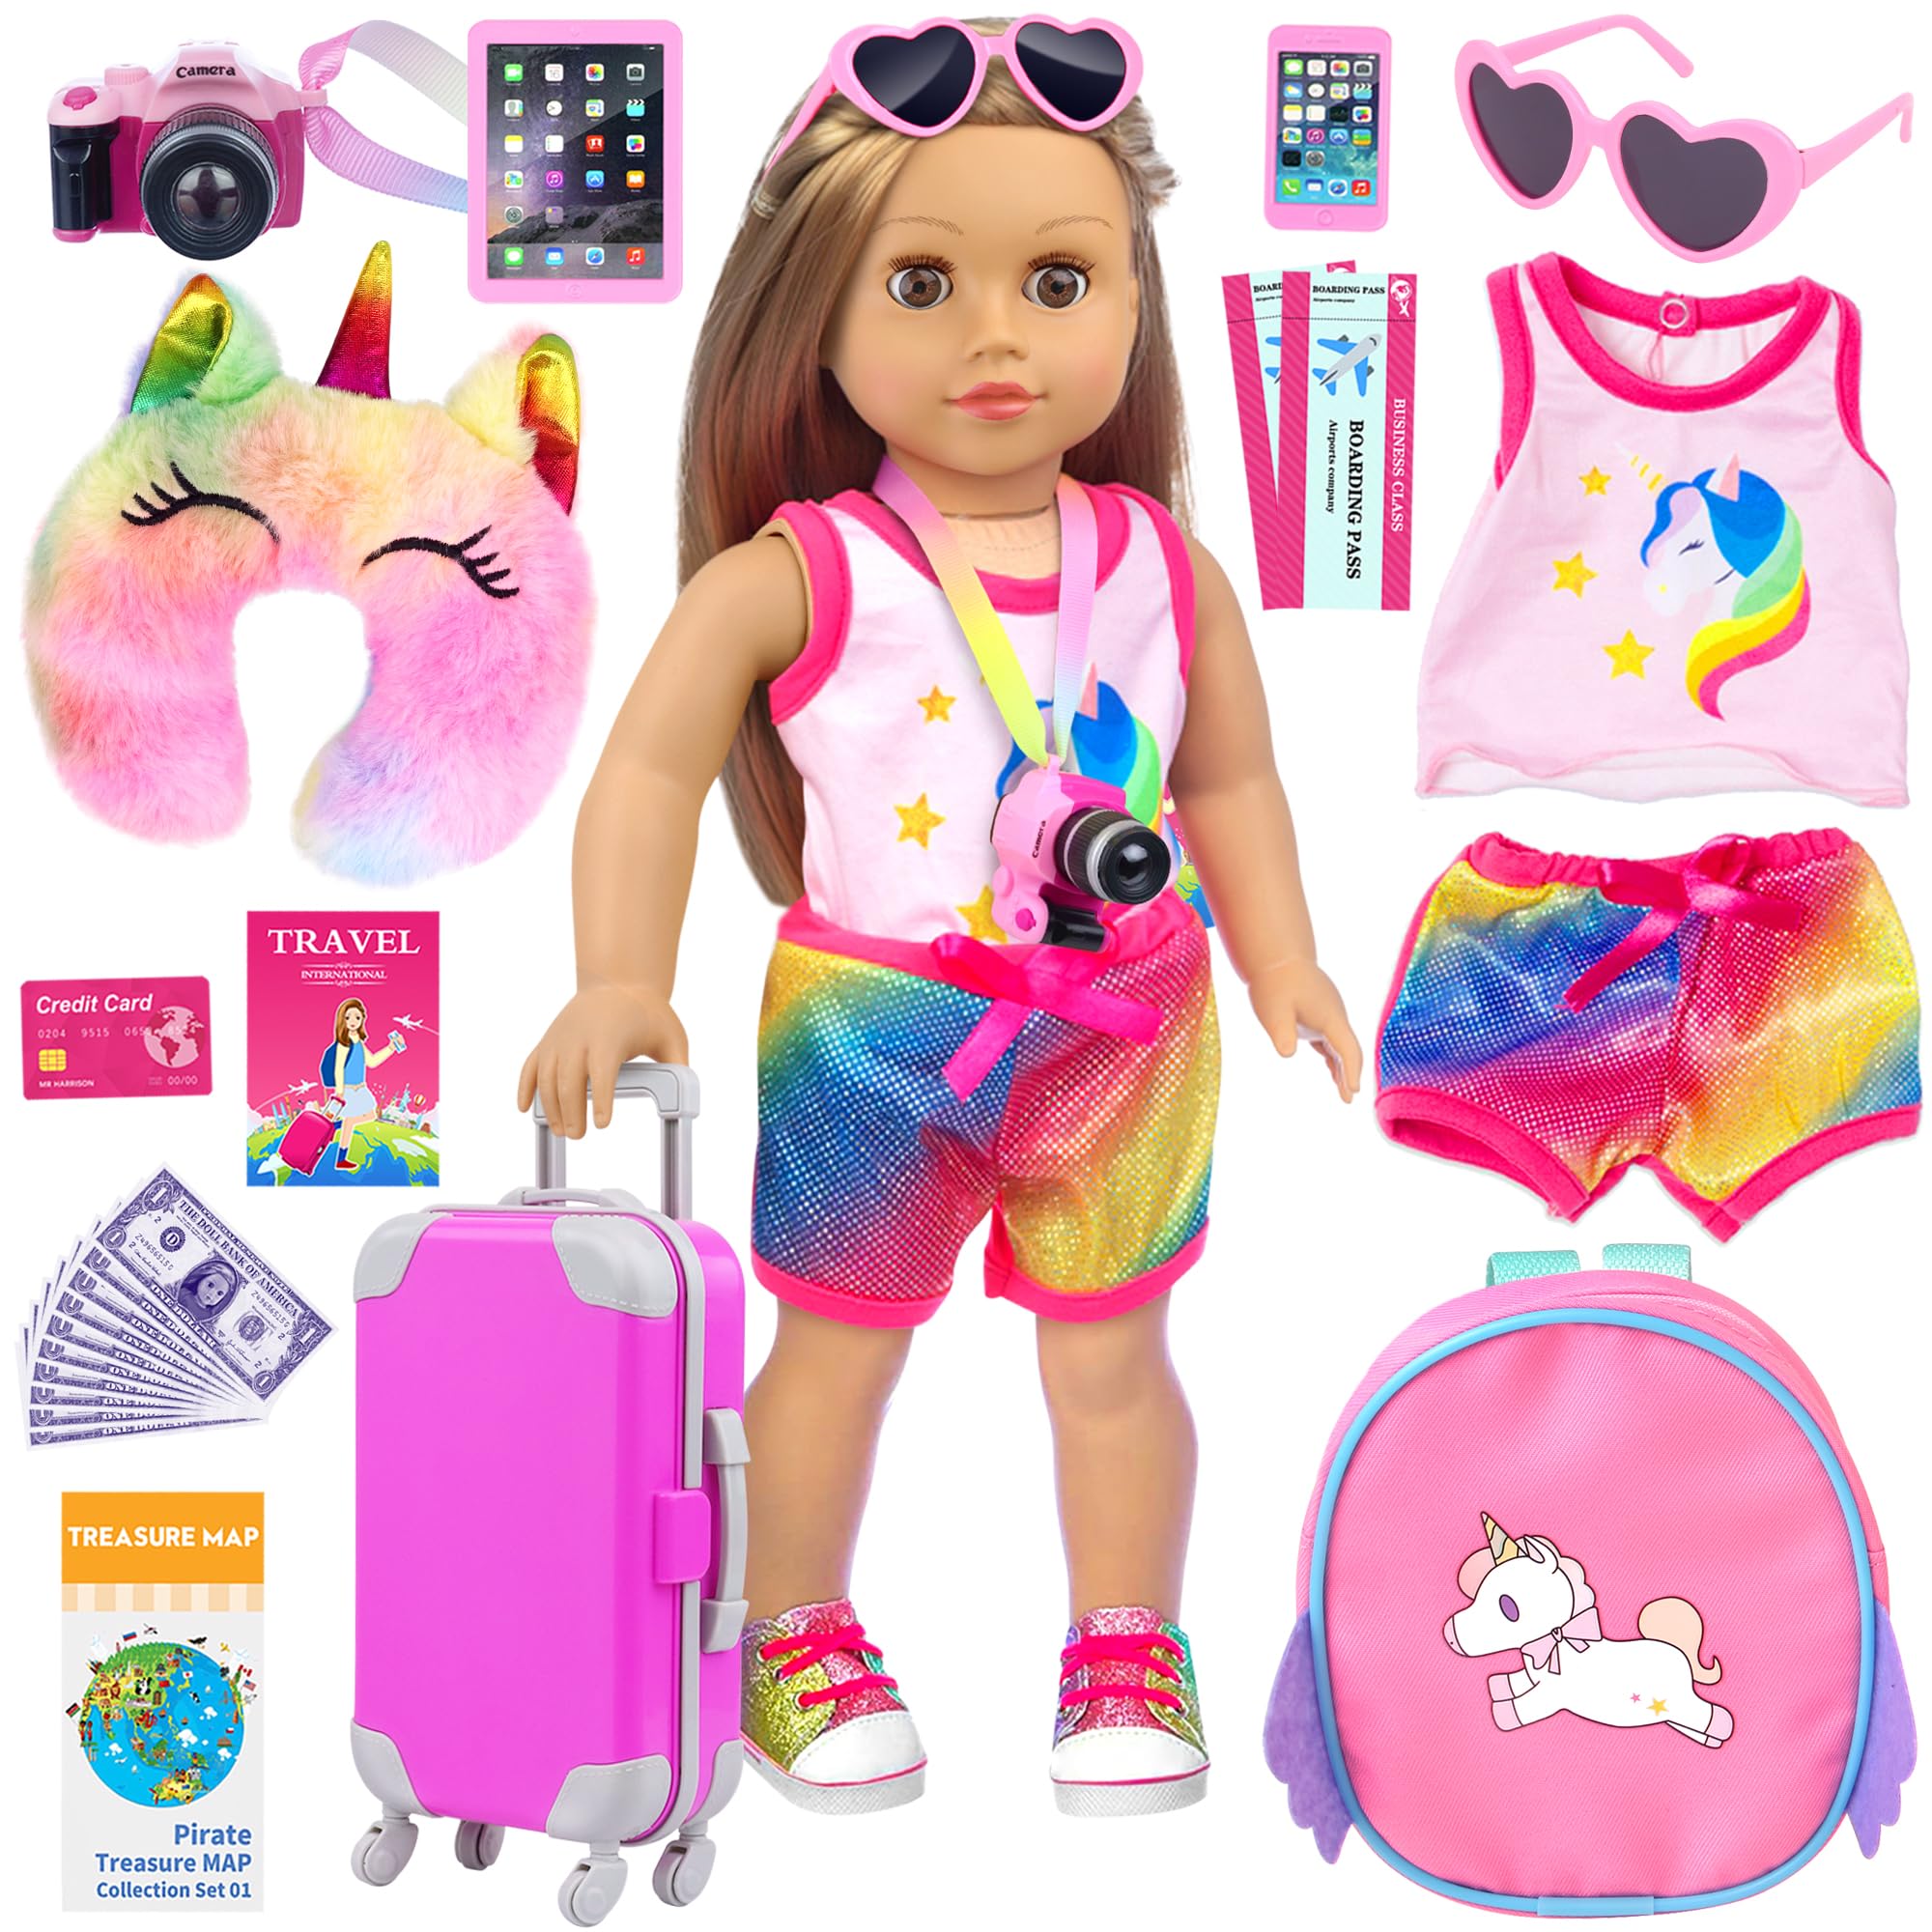 ZITA ELEMENT 24 Pcs 18 Inch Girl Doll Accessories Suitcase Luggage Travel Set Including 18 Inch Doll Clothes Luggage Pillow Blindfold Sunglasses Camera Computer Cell Phone Ipad and Other Stuff